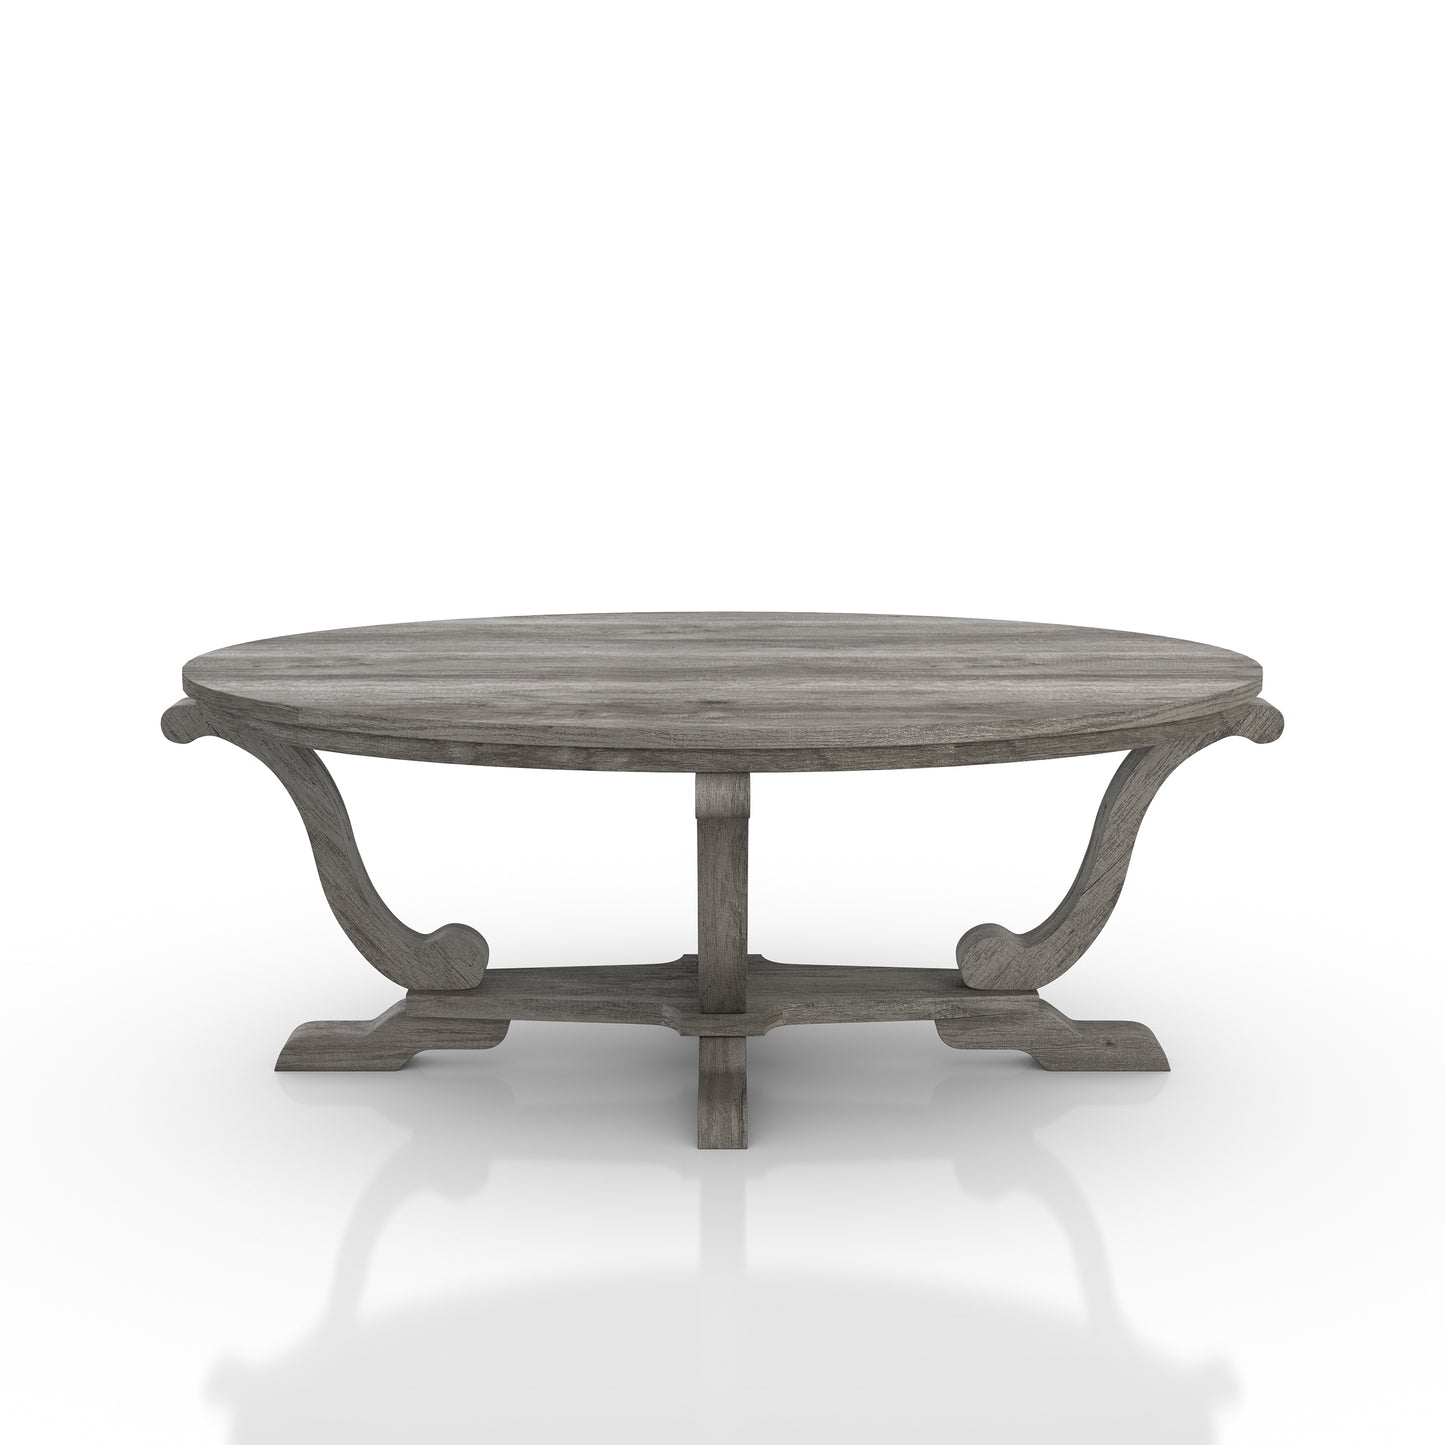 Front-facing farmhouse vintage gray oak curved pedestal coffee table on a white background